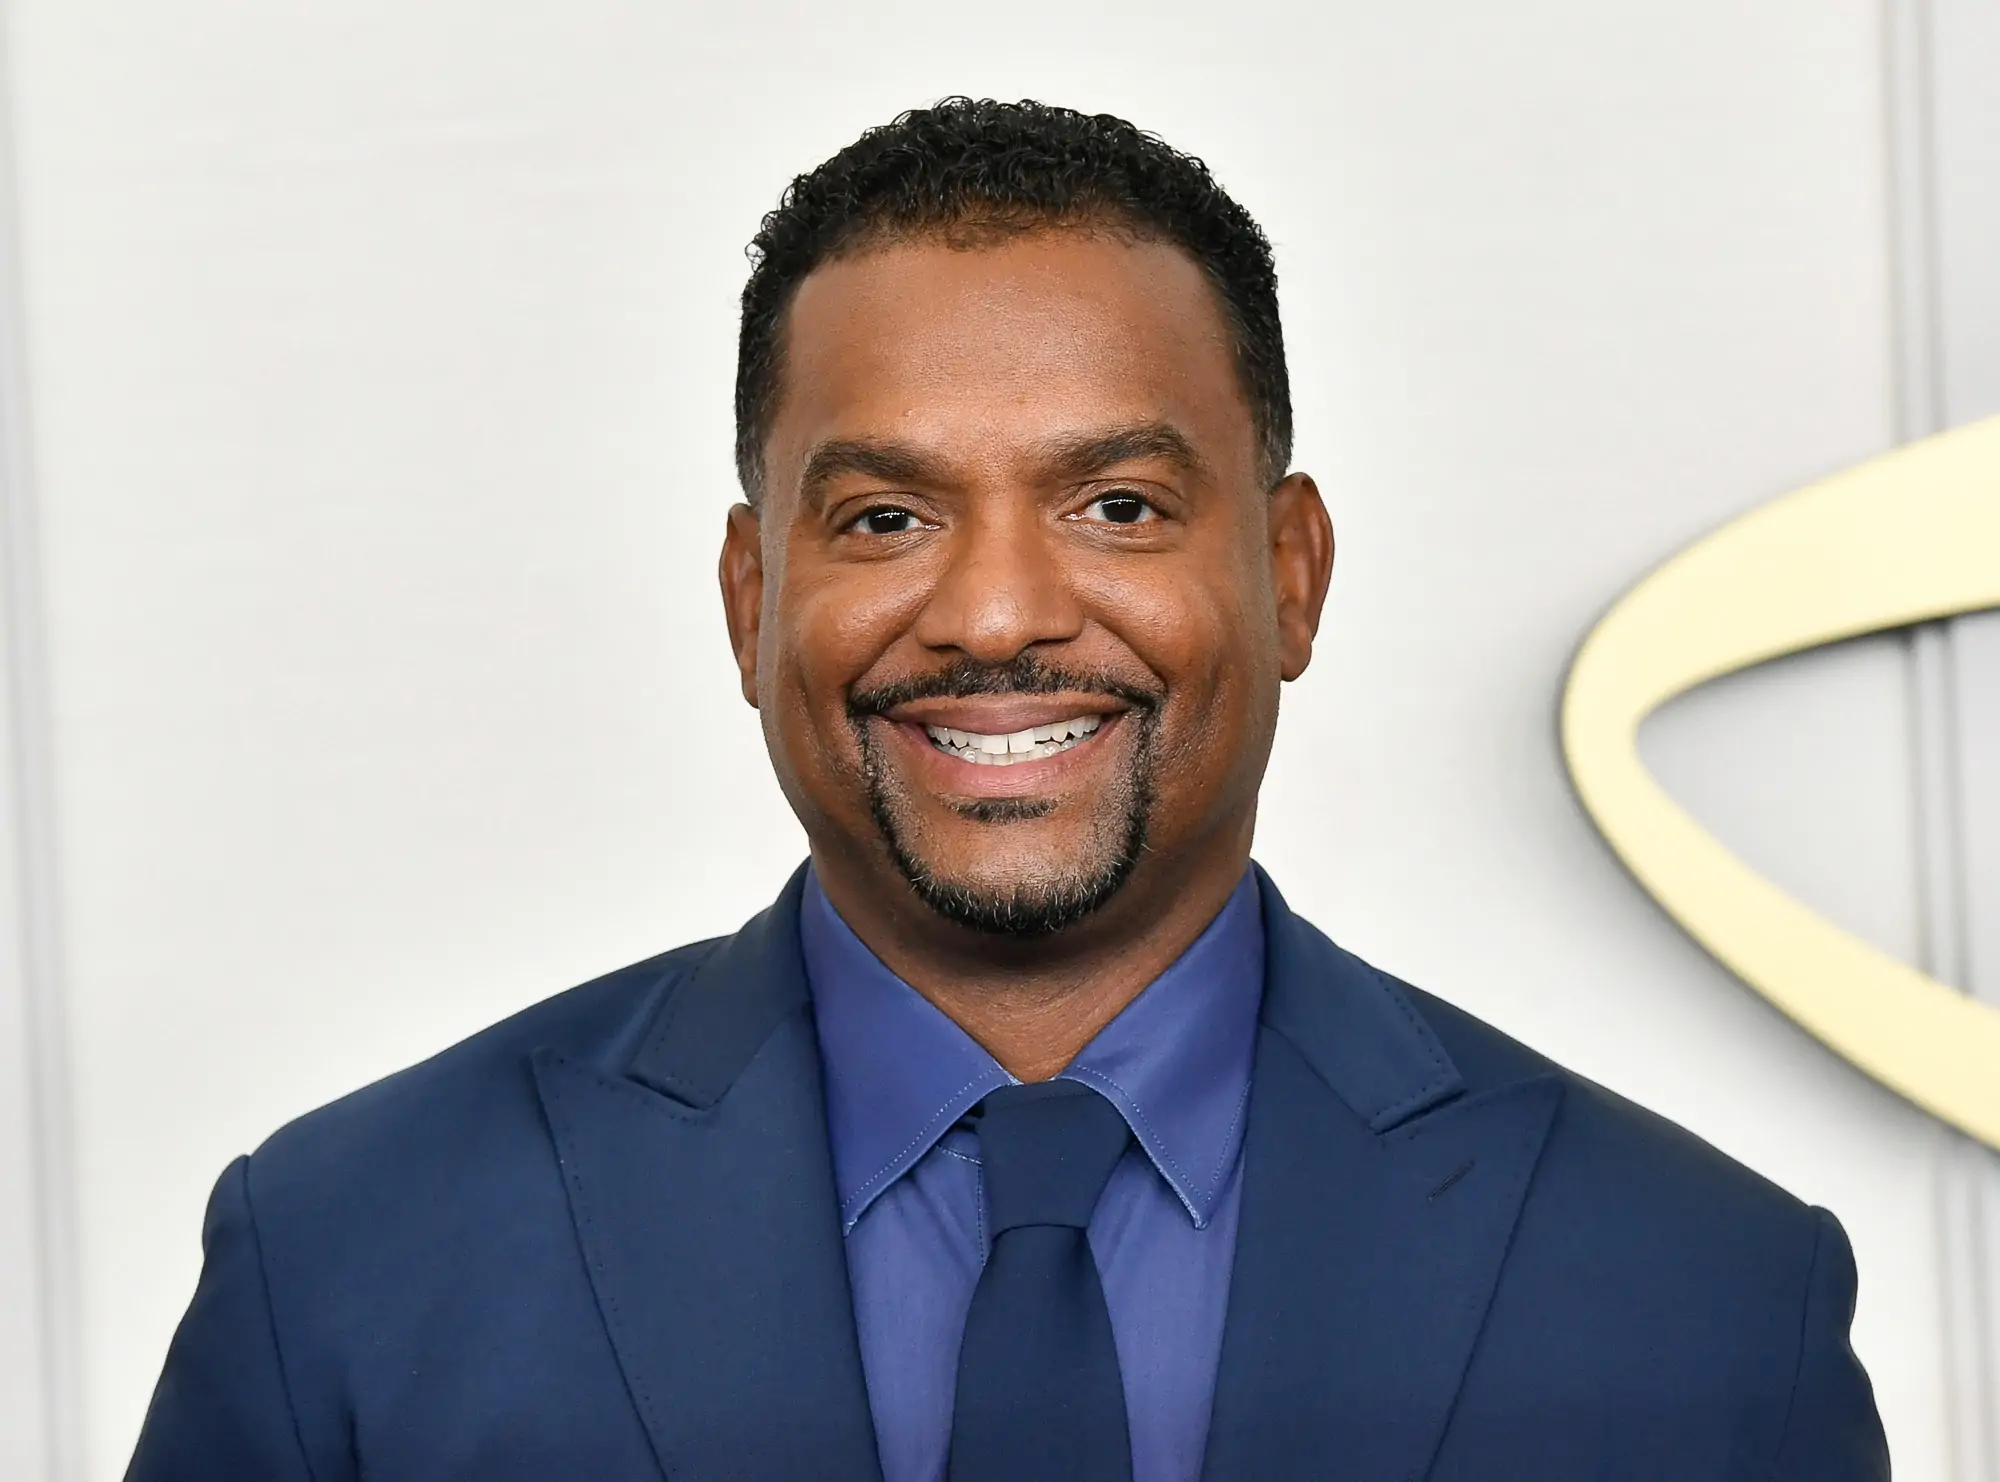 Hollywood Live: Alfonso Ribeiro doesn’t want to work with Tyler Perry | Box office woes | Idris Elba narrates new series